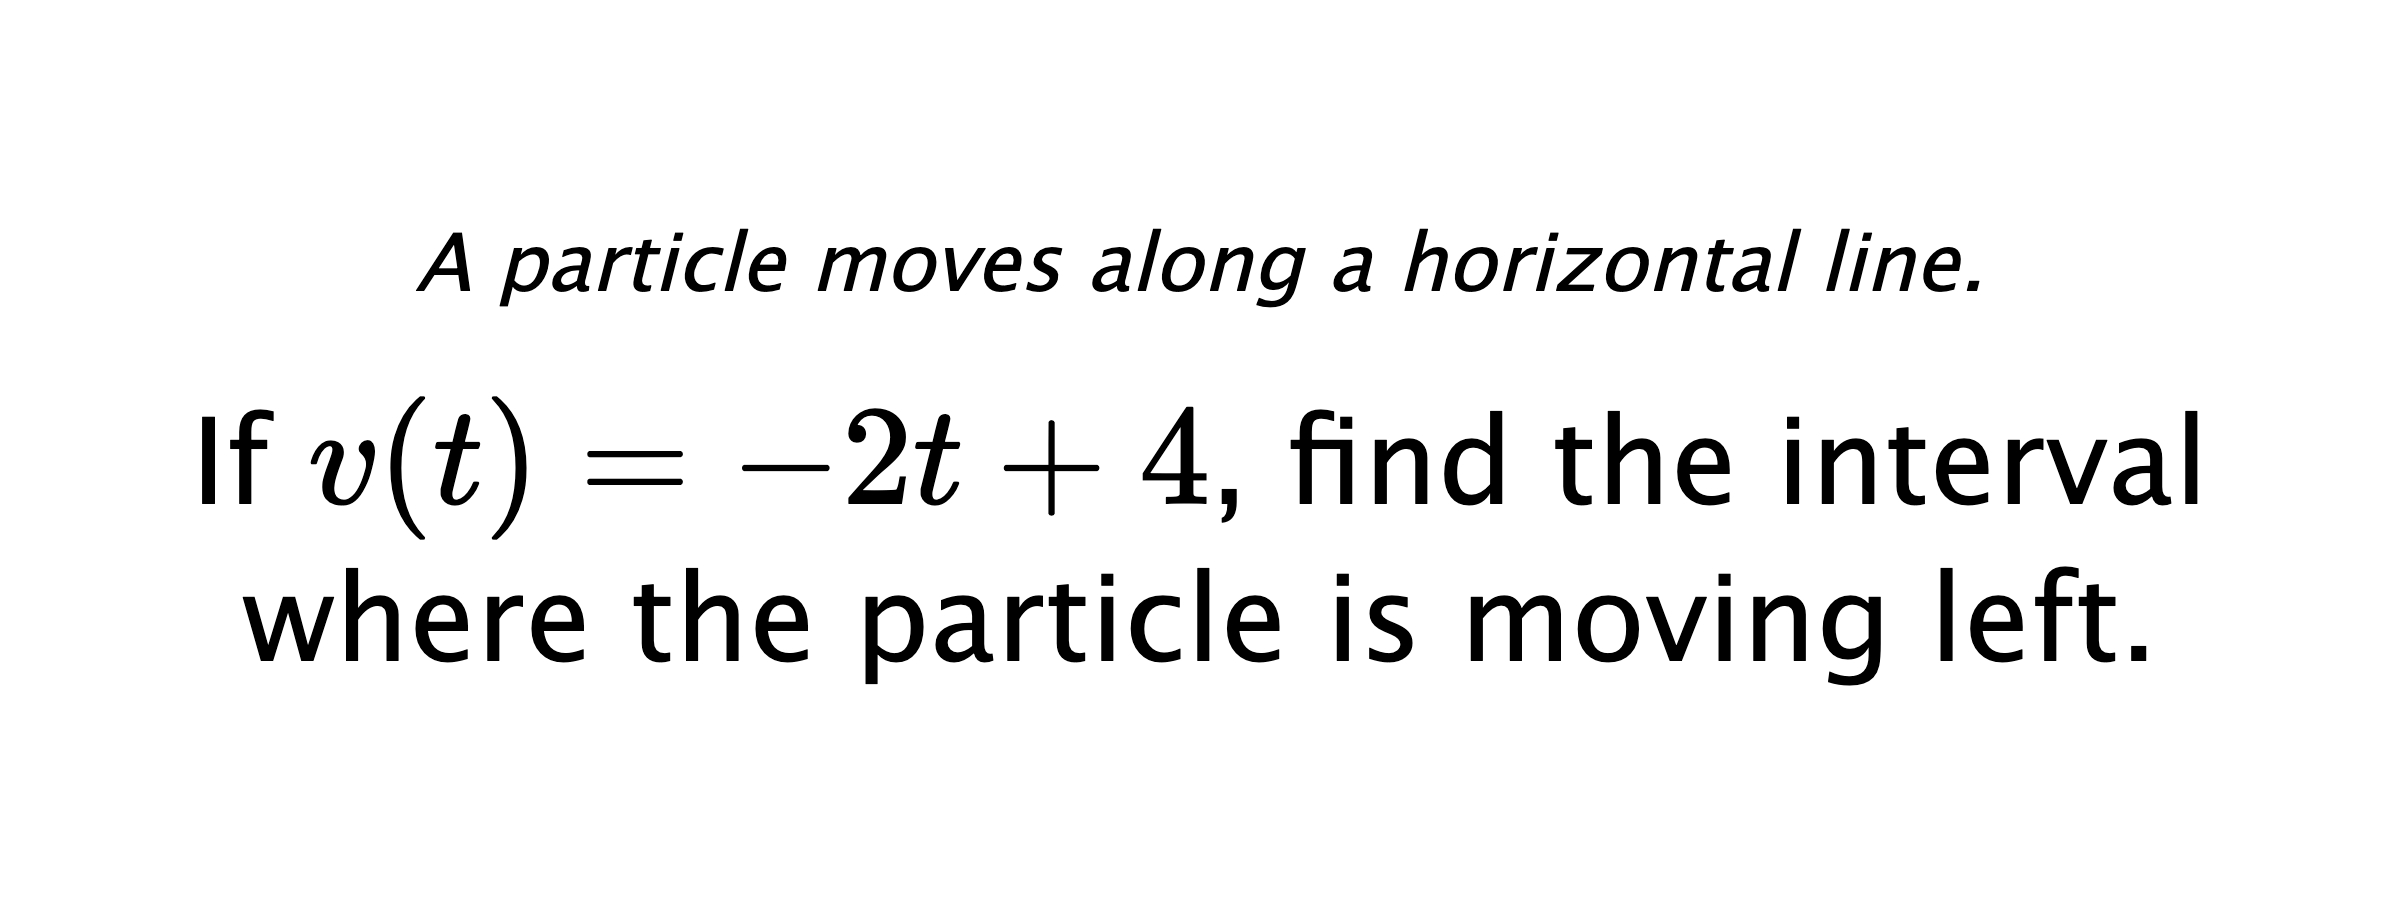 A particle moves along a horizontal line. If $ v(t)=-2t+4 $, find the interval where the particle is moving left.